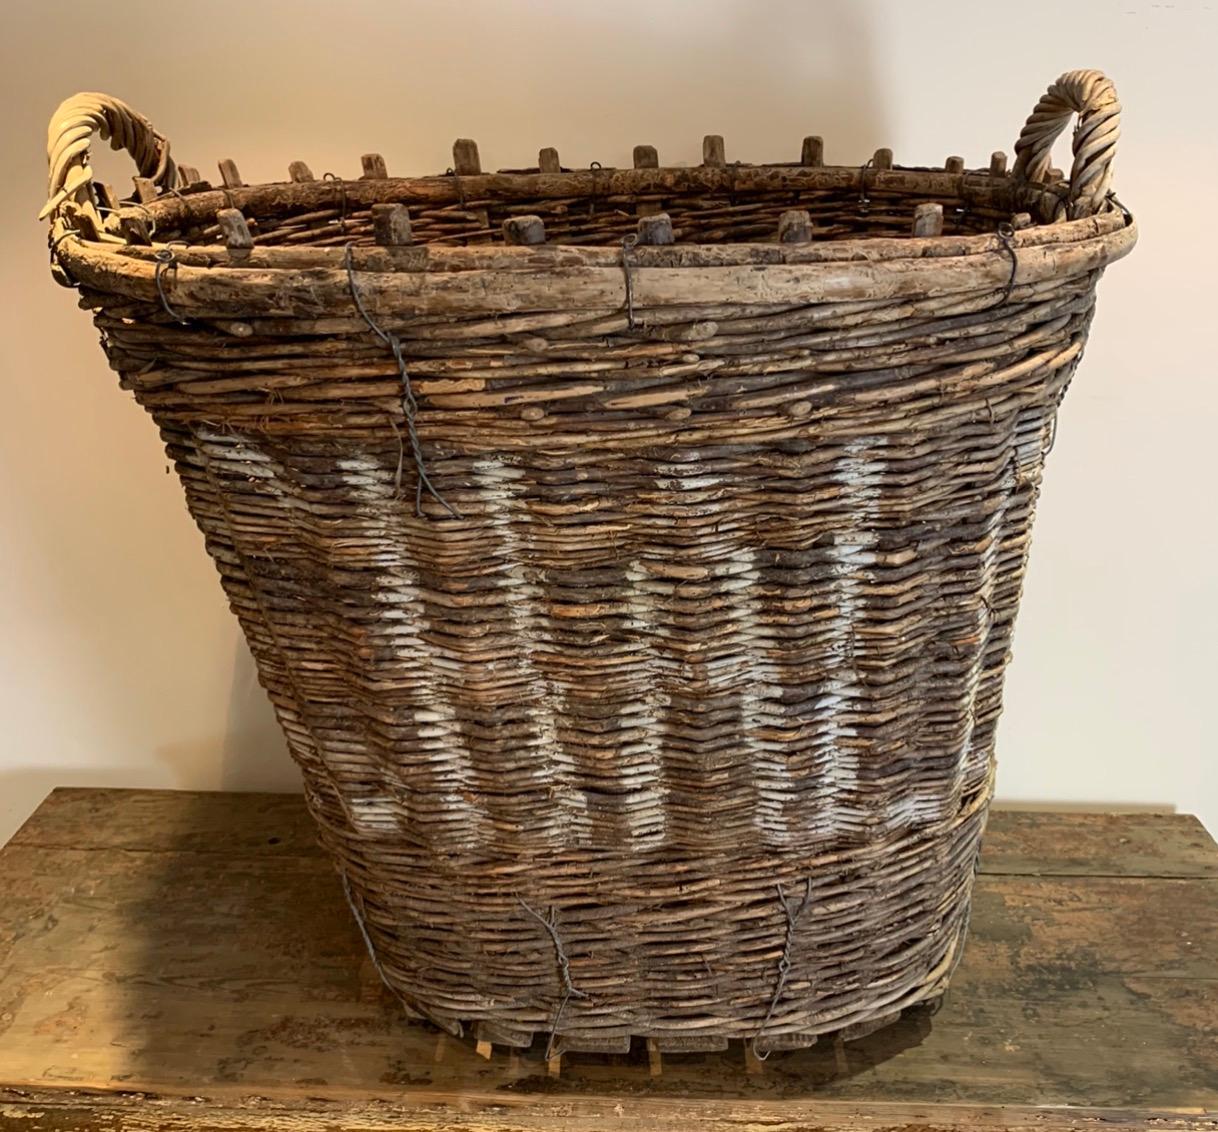 A lovely early 20th century wicker basket from France. This would have been used to harvest grapes for Champagne. This size is much larger than the normal ones. The wicker has a lovely weathered patina.